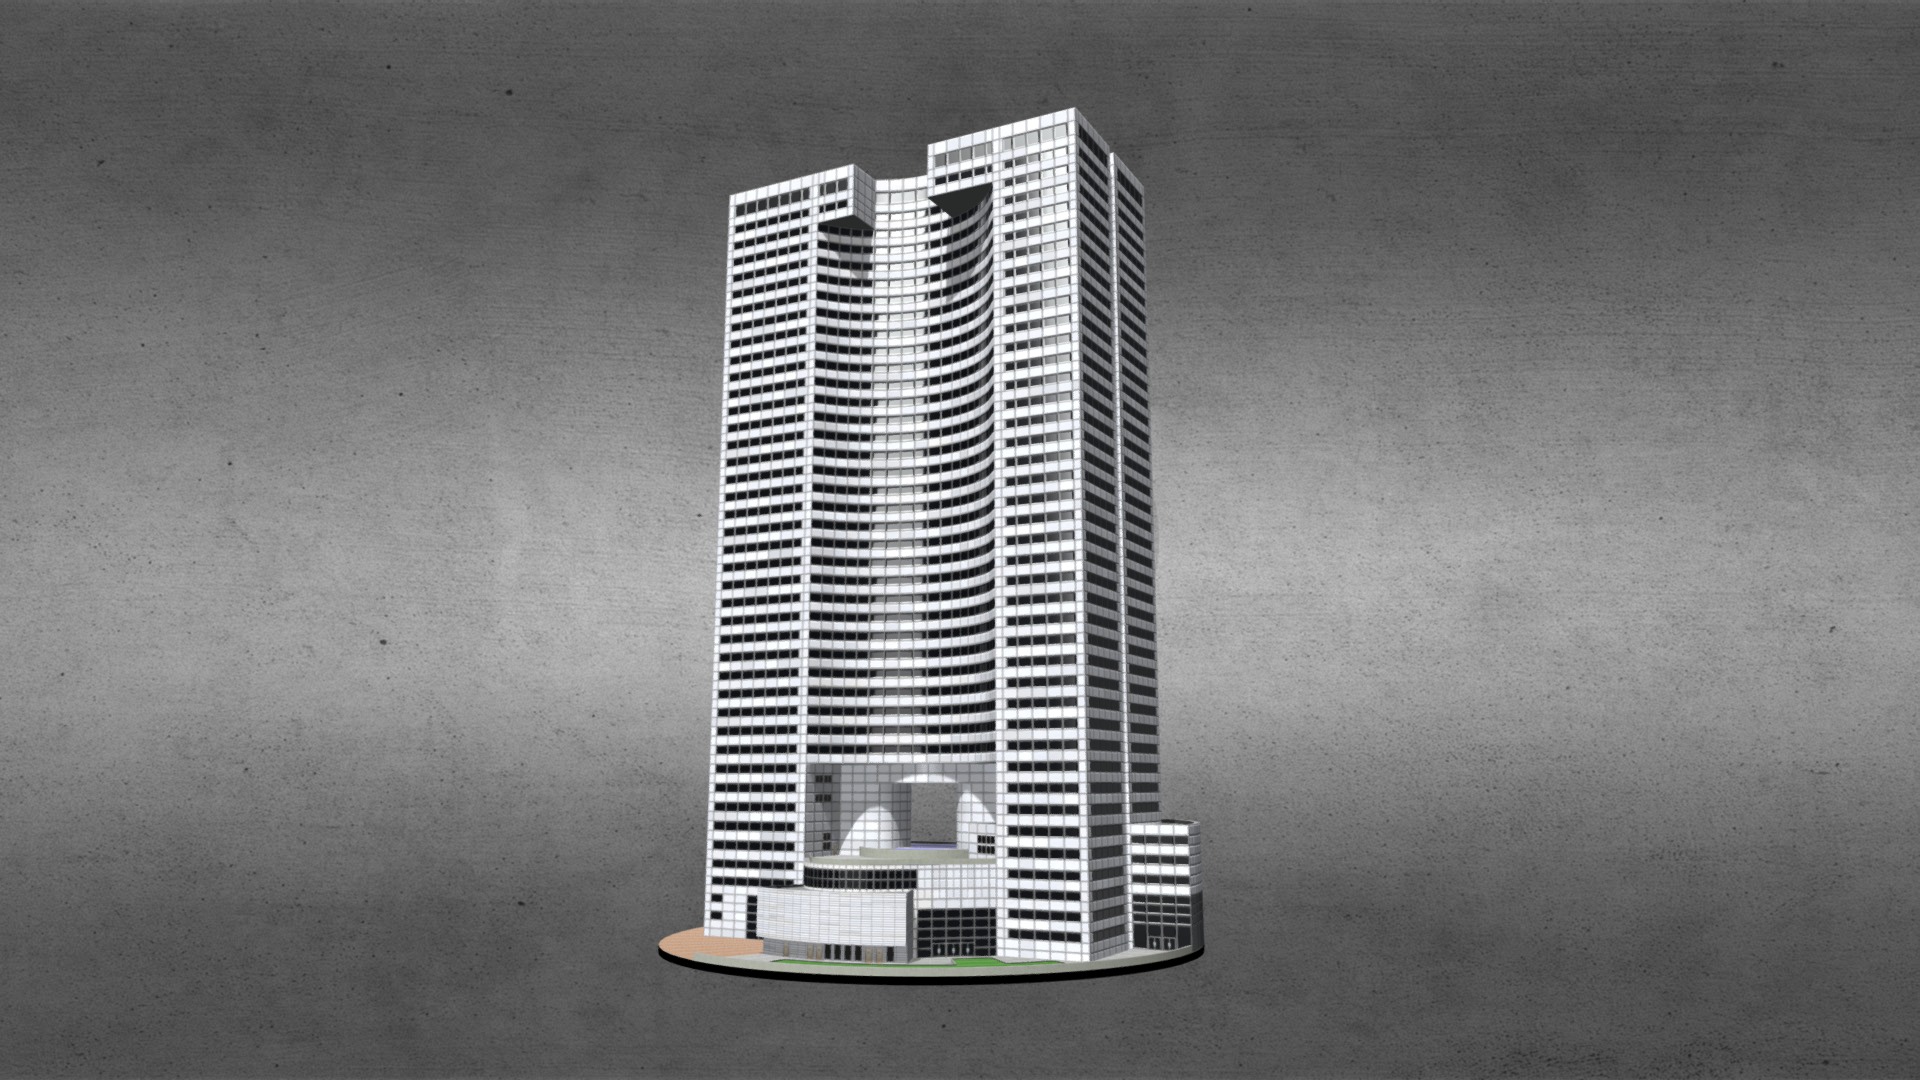 3D model EQHO Tower – La Défense / Paris - This is a 3D model of the EQHO Tower - La Défense / Paris. The 3D model is about a tall building with a glass front.